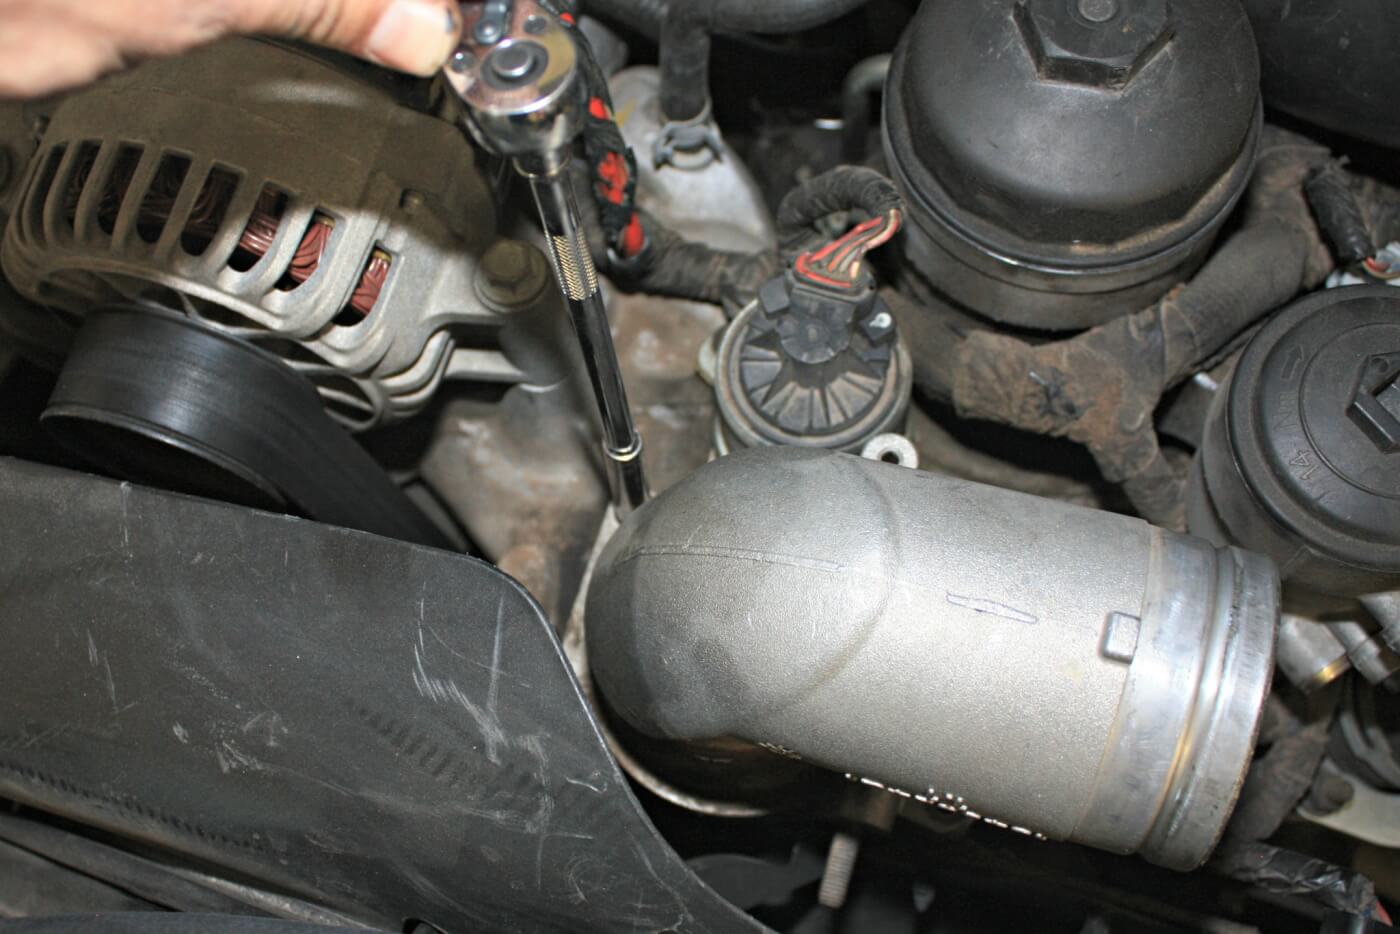 9. The factory intake elbow is then removed to make way for the better flowing High Ram Elbow. The sharp tight bends inside the stock elbow aren’t conducive to good flow and upgrading can offer both better throttle response and improved mileage.